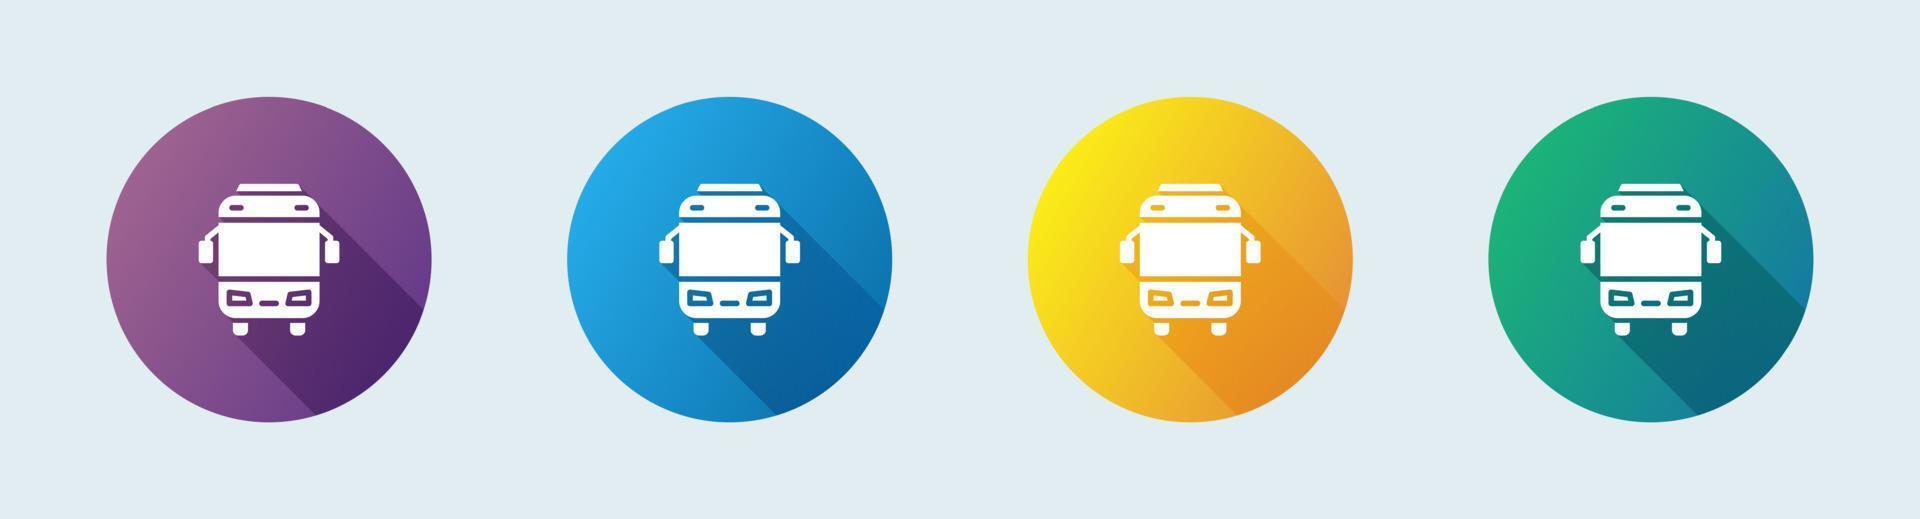 Bus solid icon in flat design style. Transport signs vector illustration.